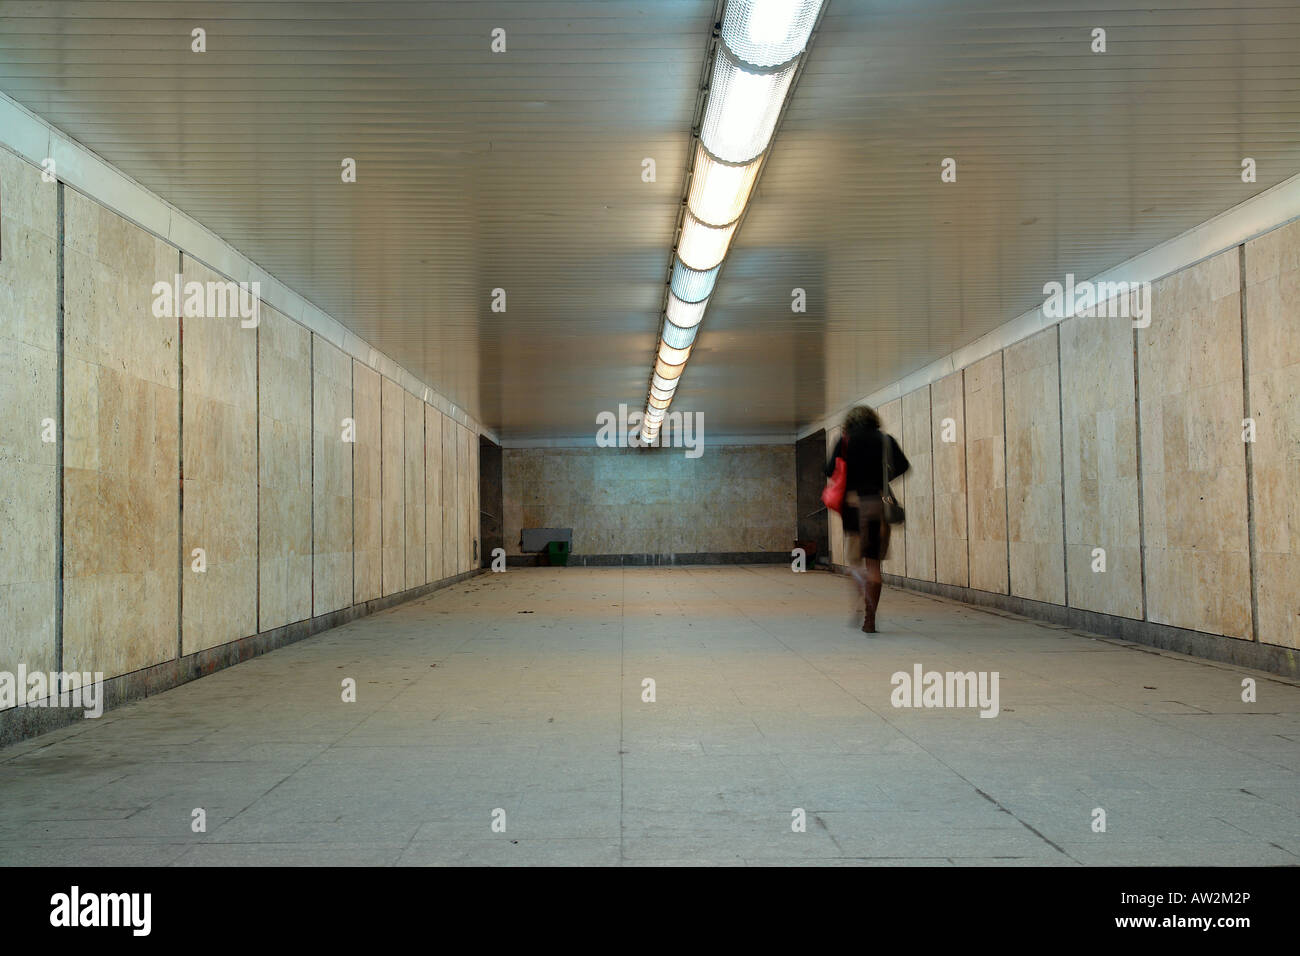 Woman with red bag going through underground passage Stock Photo